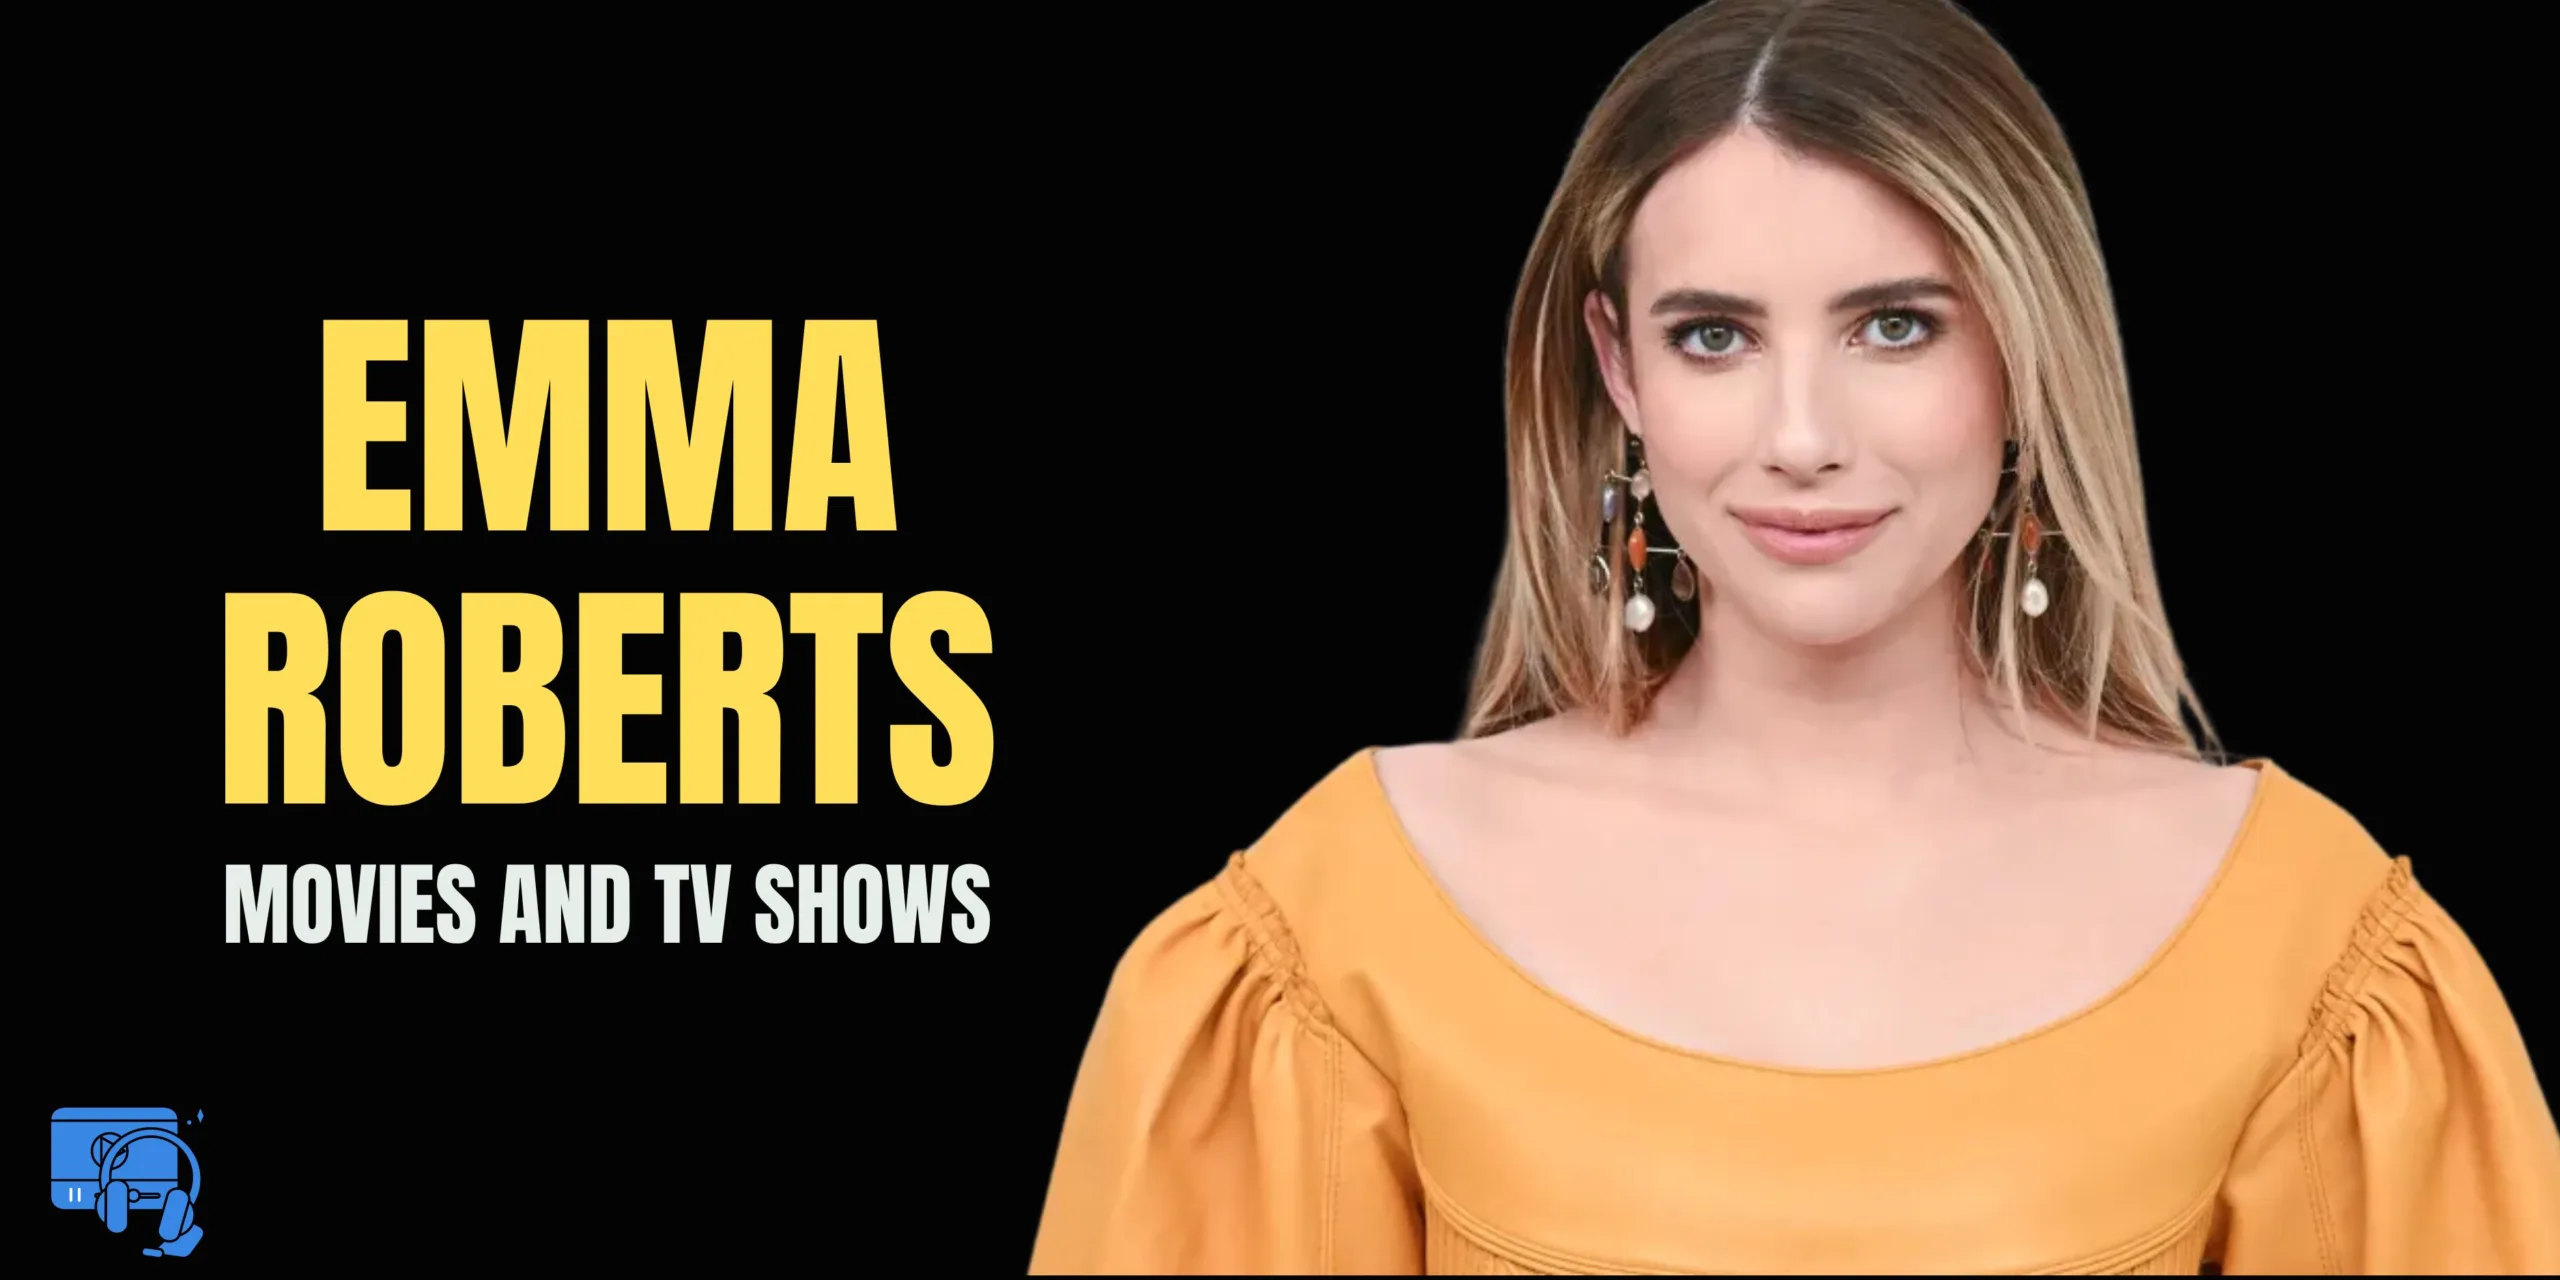 Emma Roberts Movies And Tv Shows